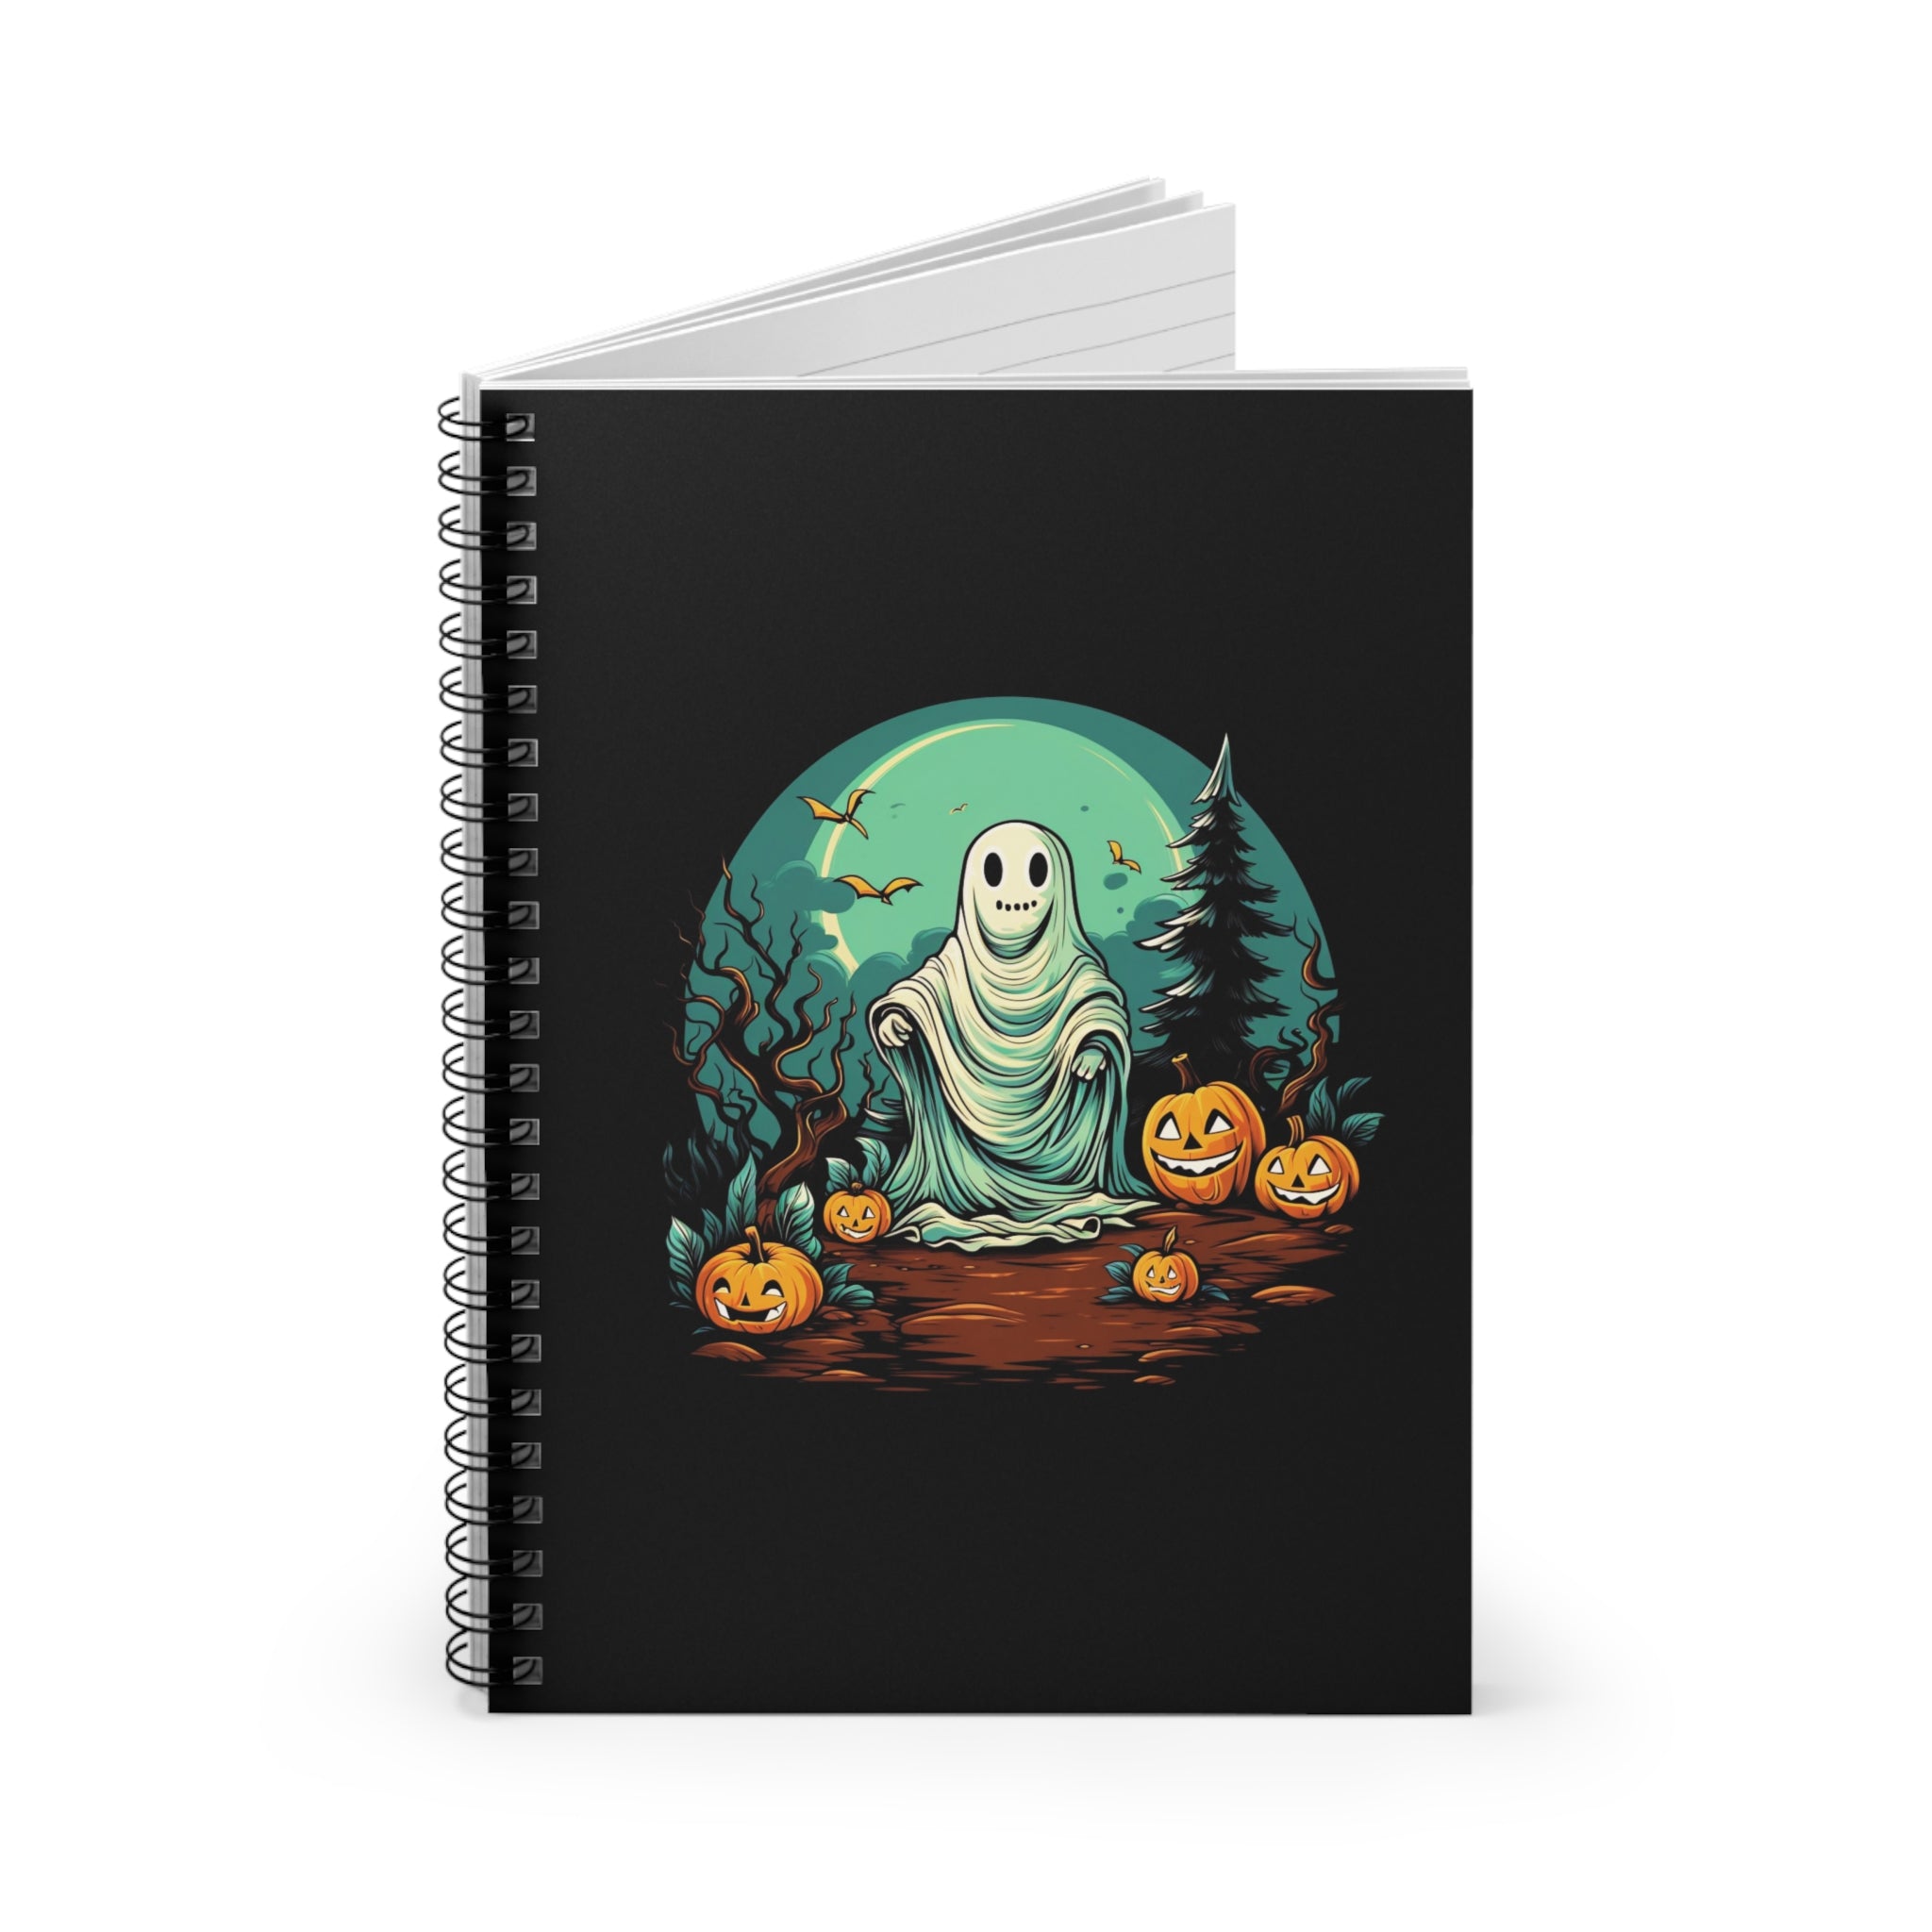 Are You Scared Yet? | Cute Halloween Ghost Journal | Spooky | Spiral Notebook - Ruled Line